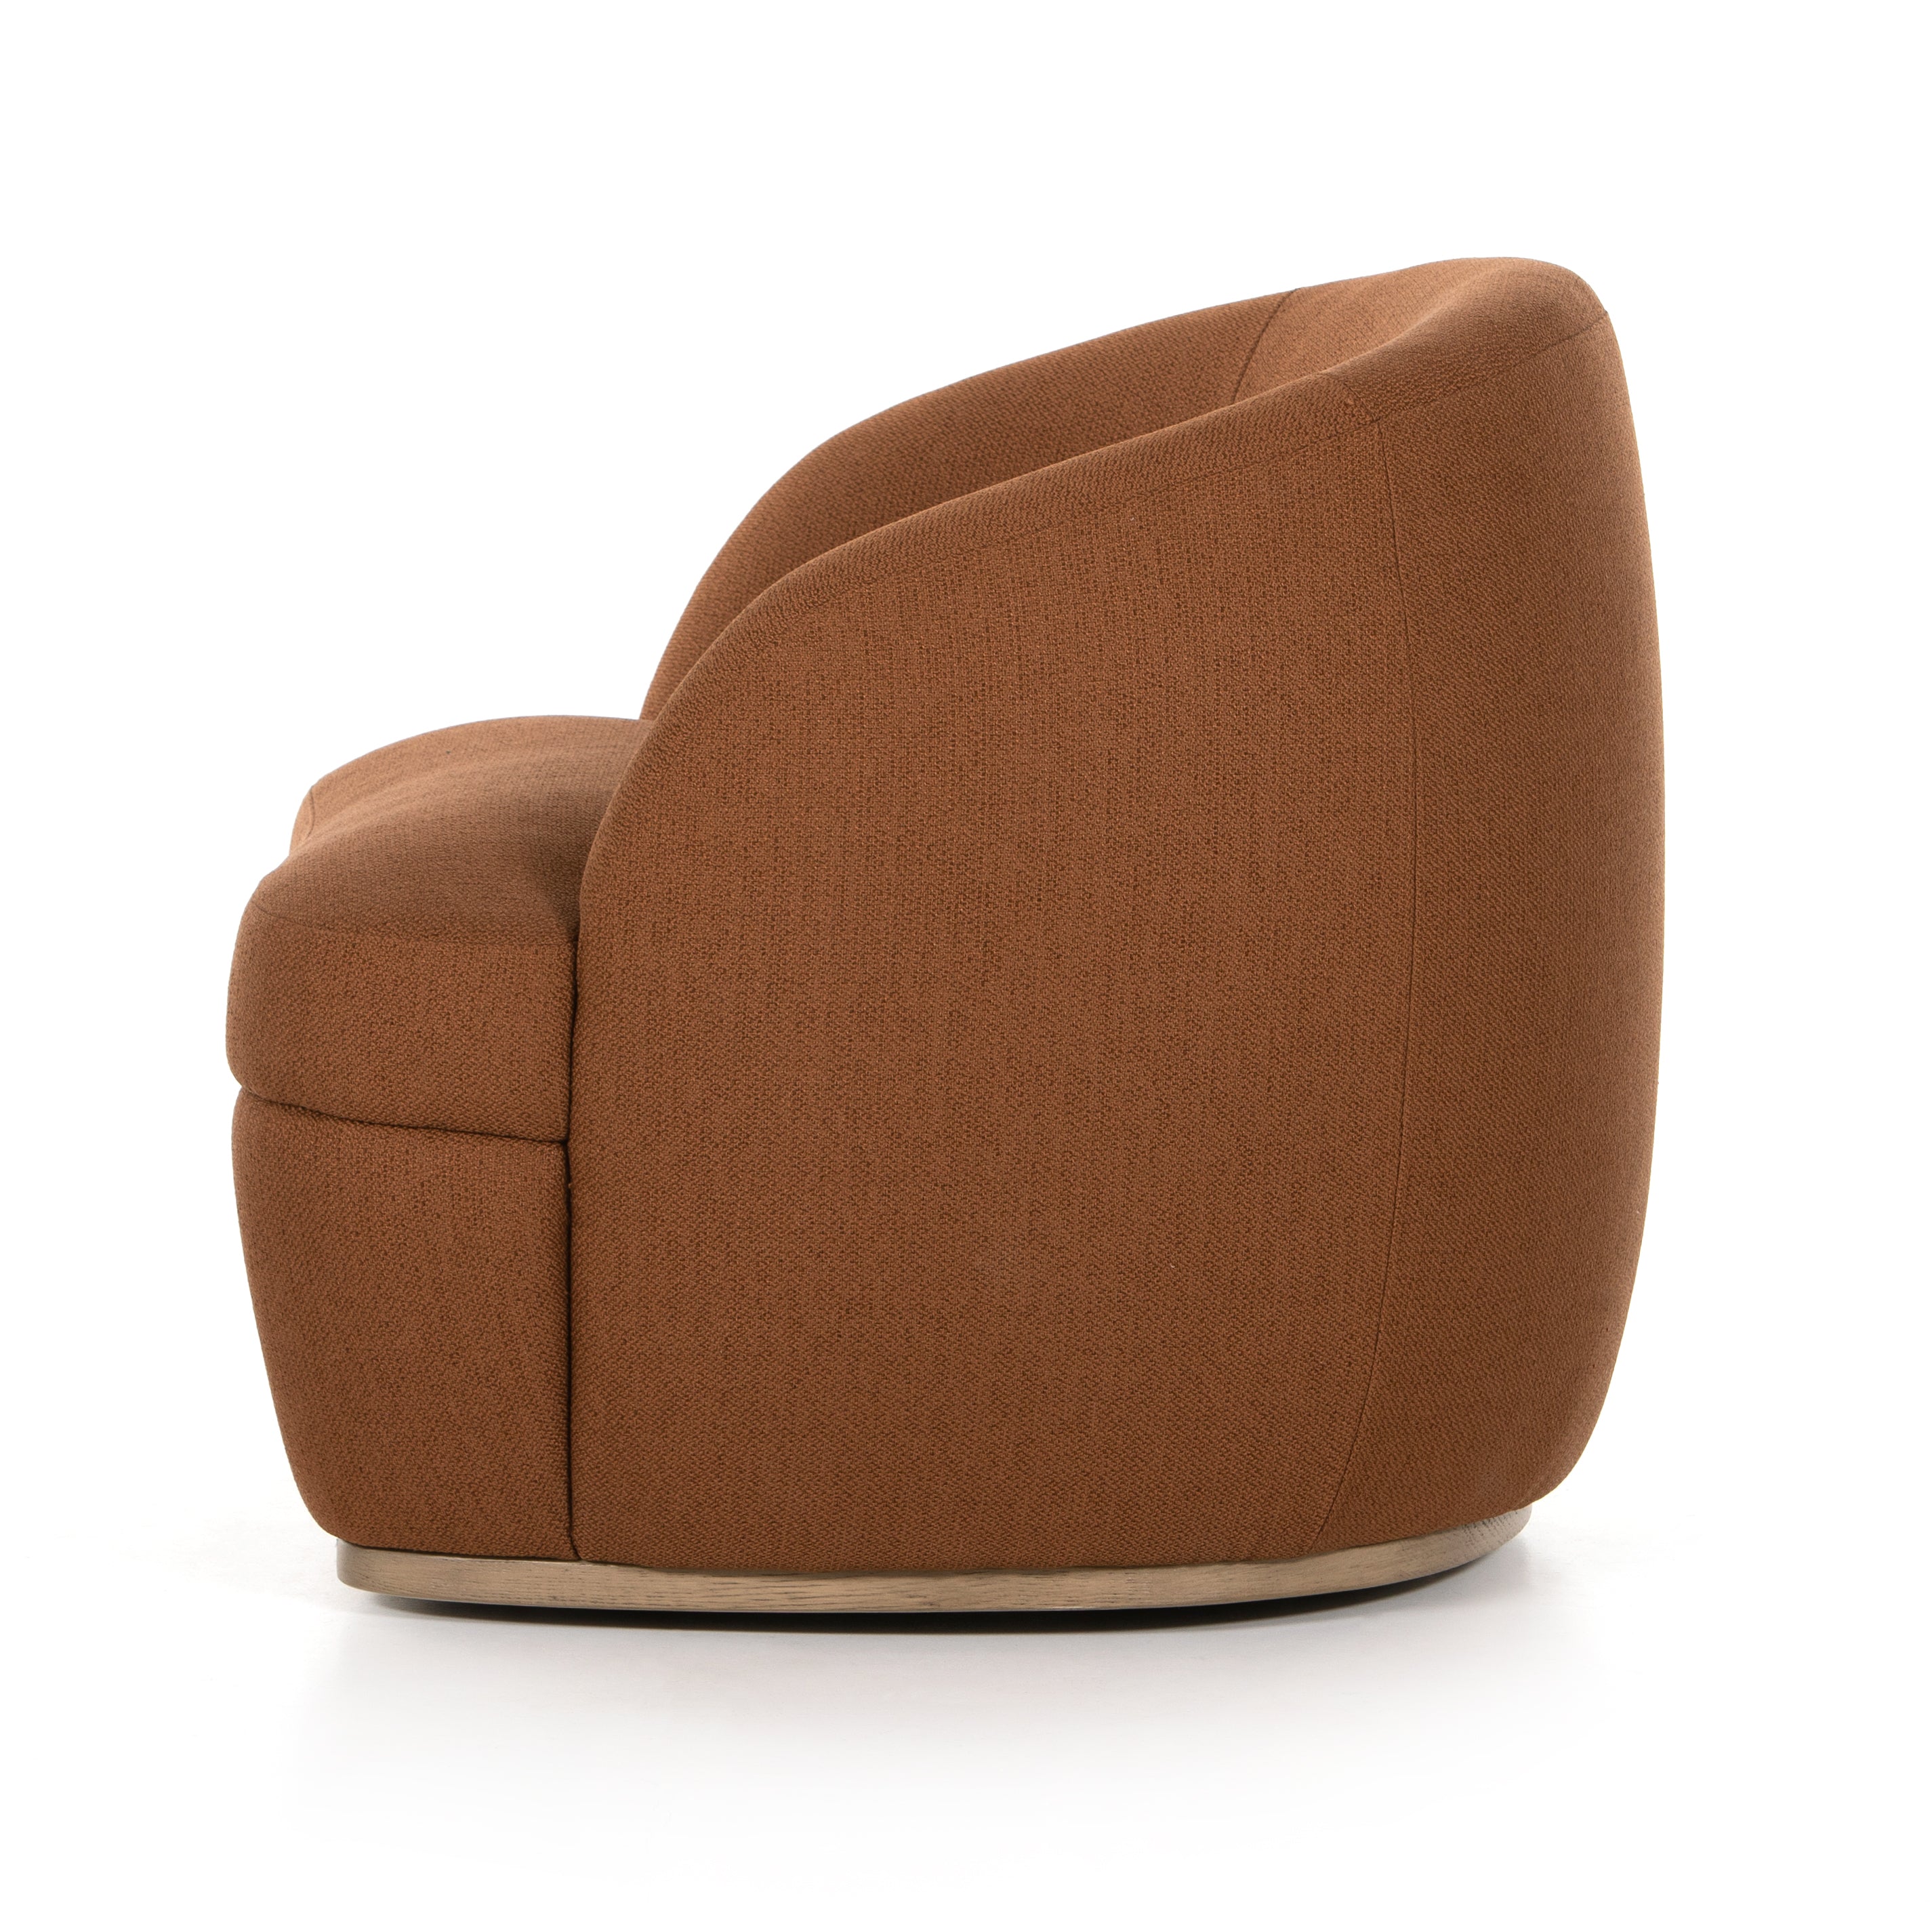 Sleek femme from every angle with Sandie Swivel Chair - Patton Burnish. Chunky rust-colored upholstery brings a trend-forward feel to barrel-style seating atop a 360-degree swivel base of solid oak.  Overall Dimensions: 33.00"w x 32.50"d x 30.00"h